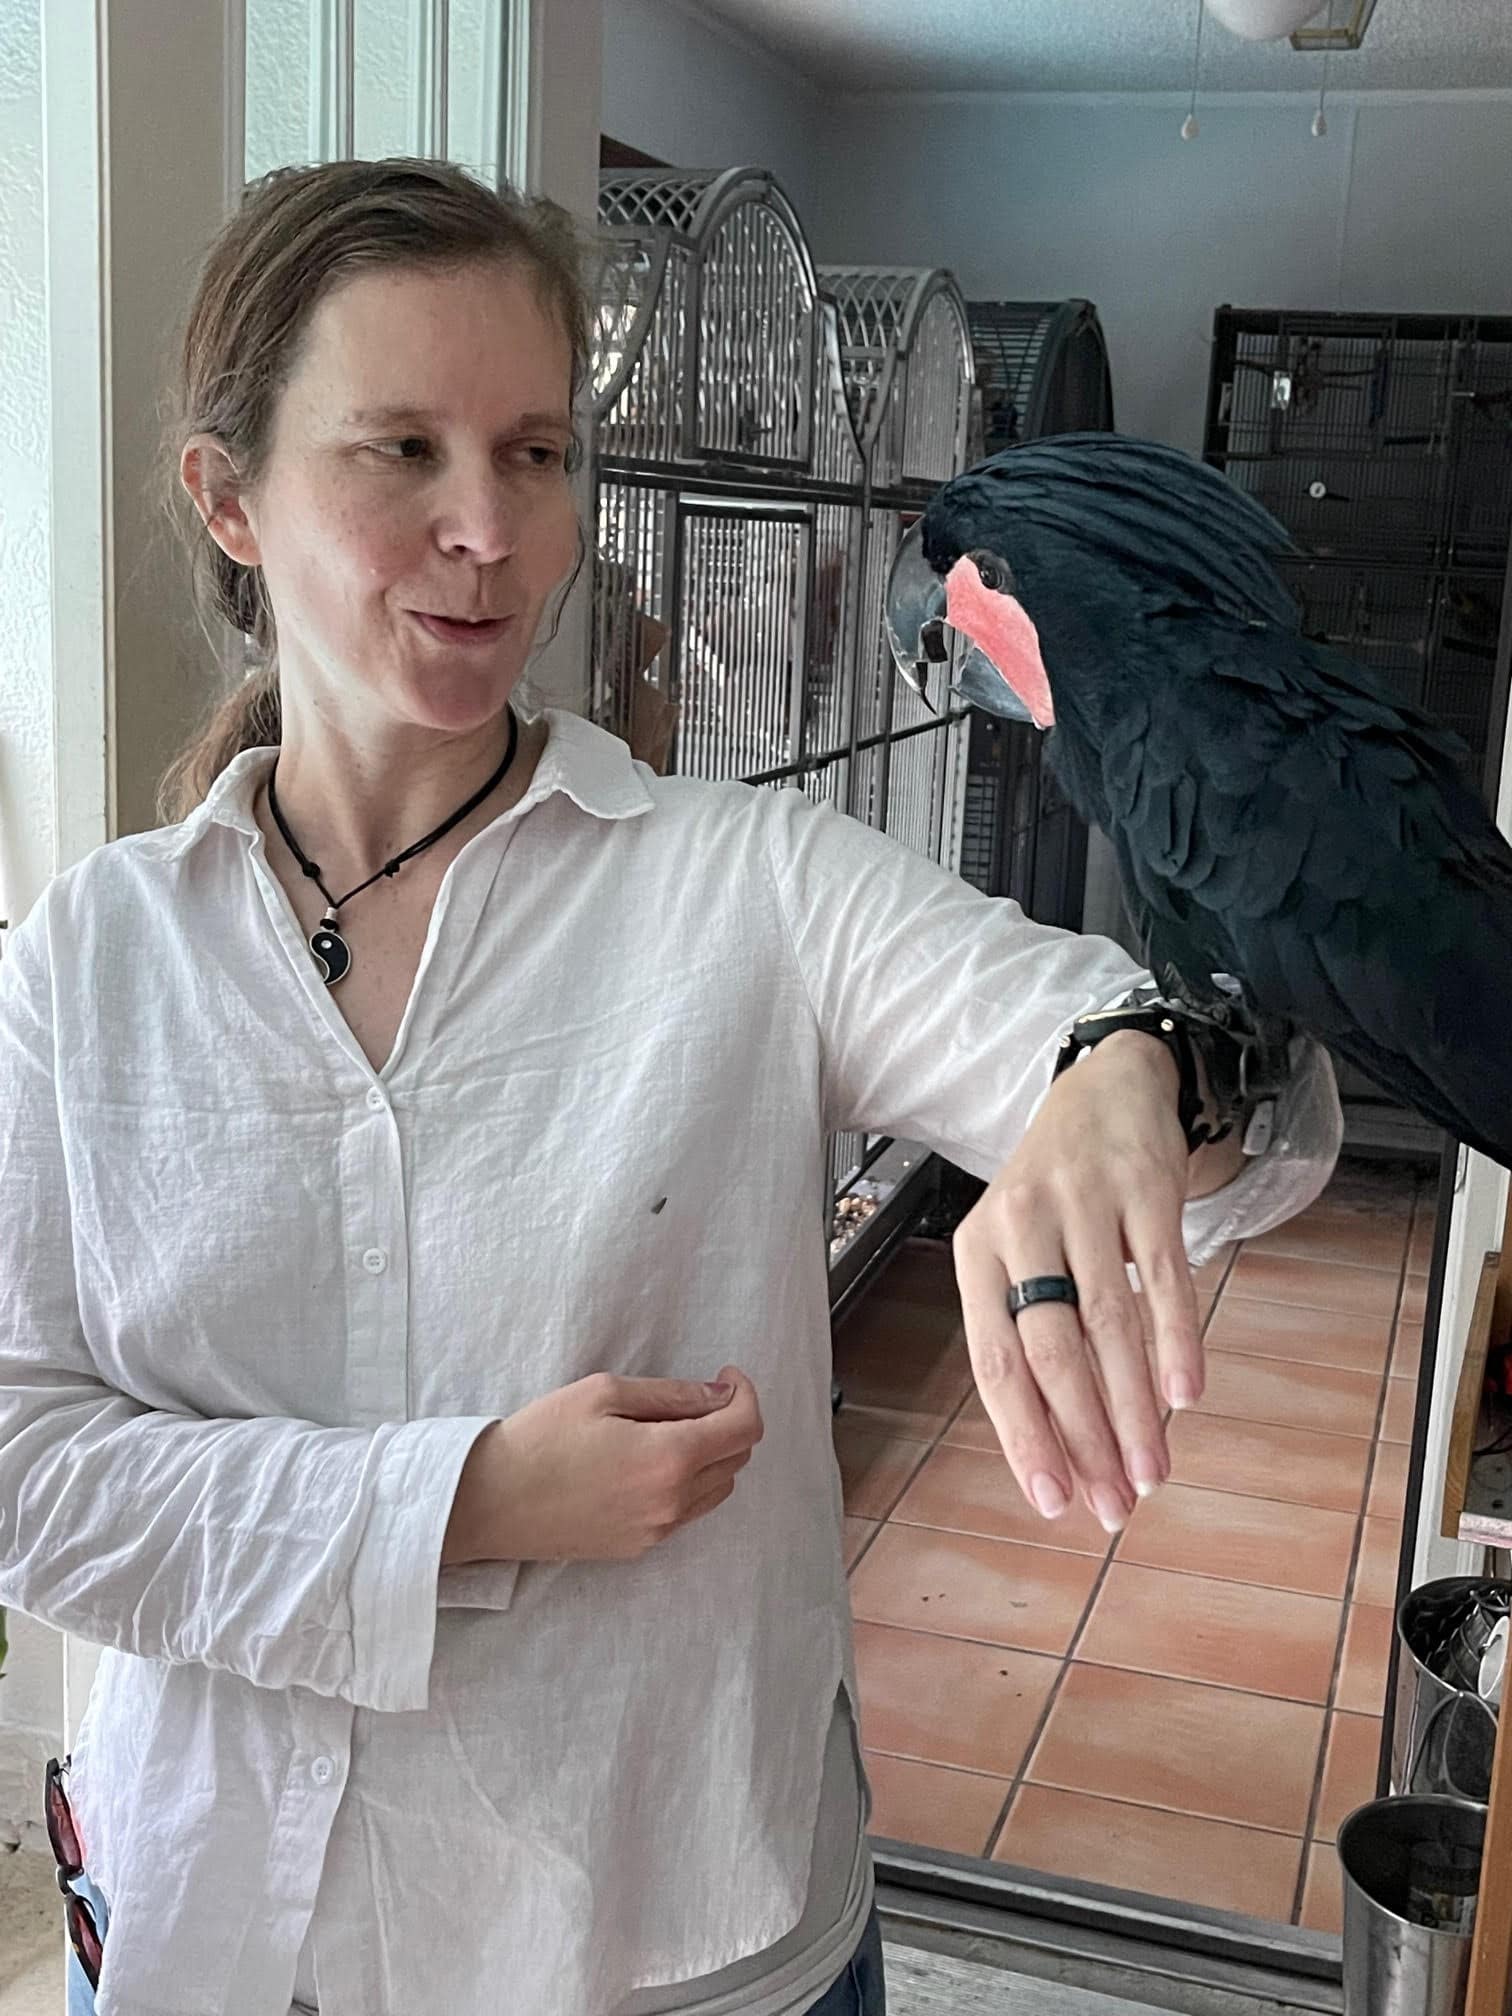 Professor with bird perched on arm